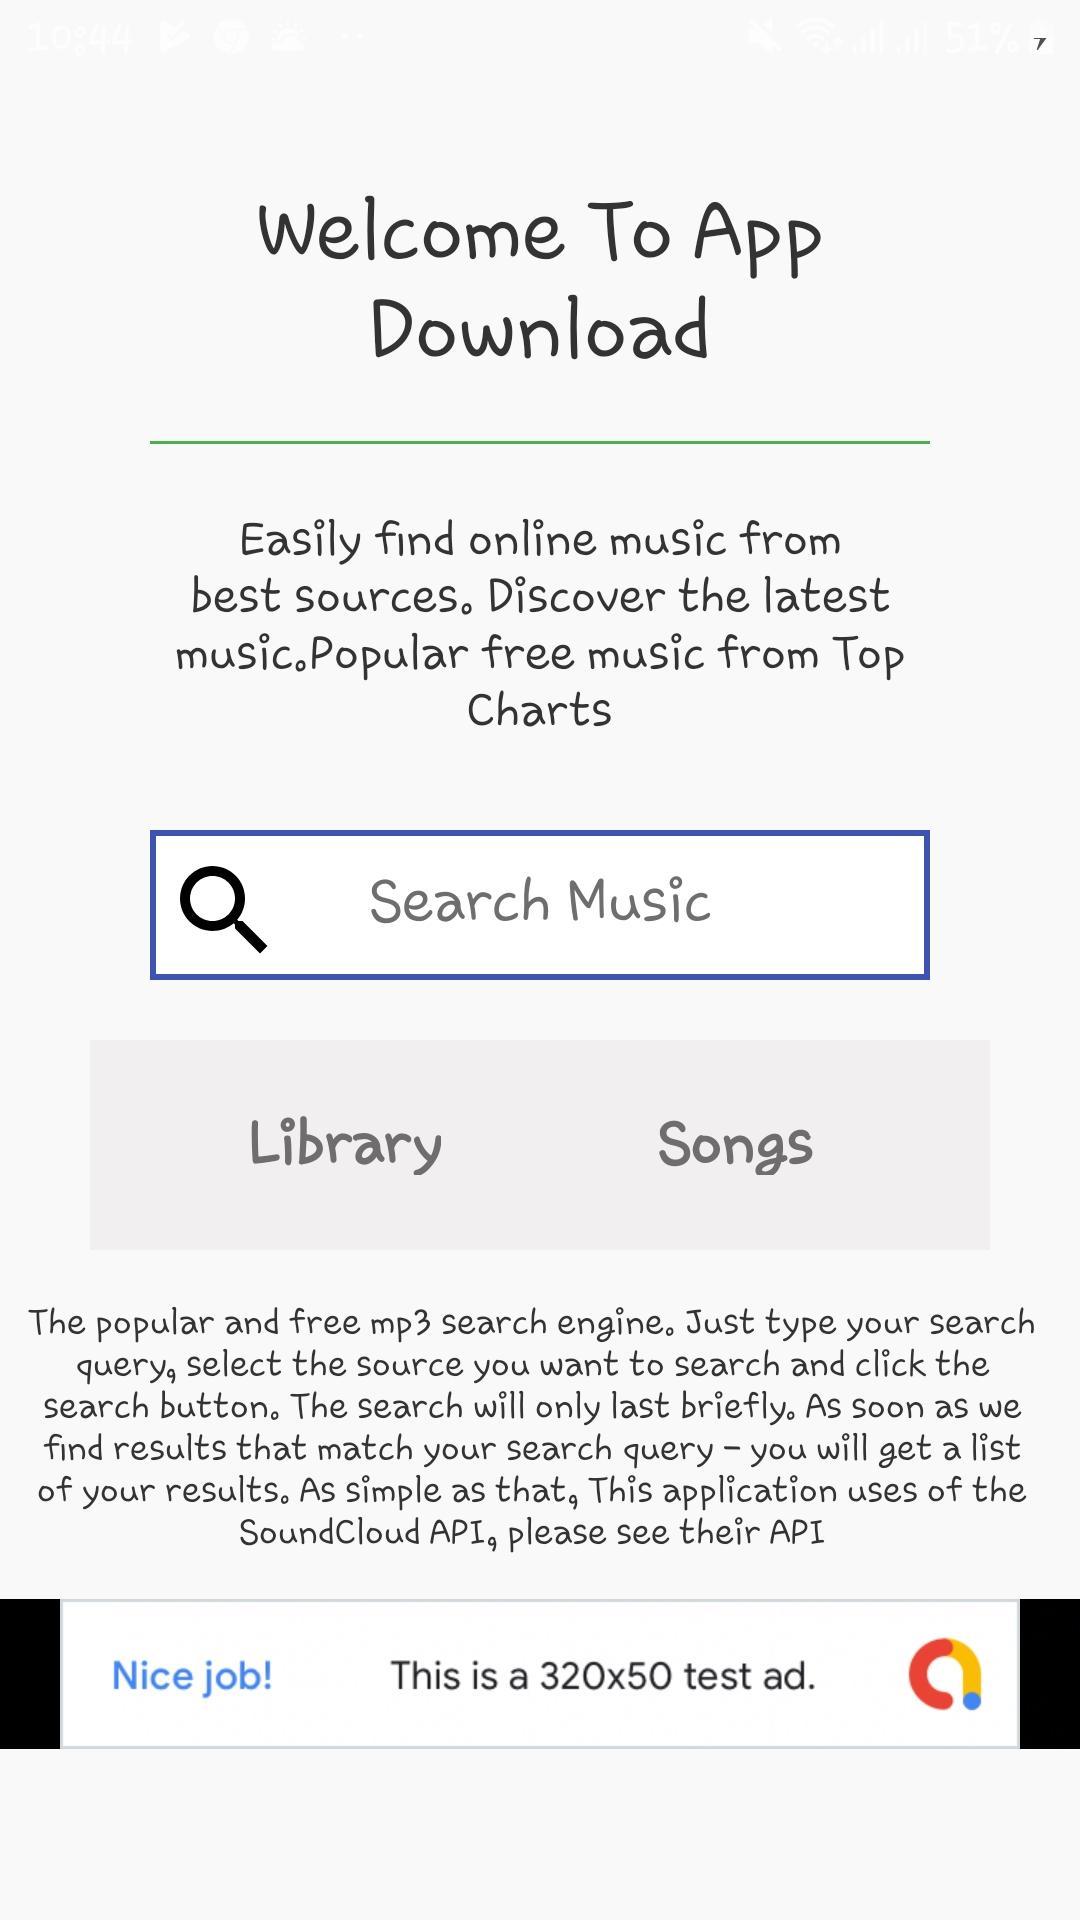 mp3 - savefrom net for Android - APK Download